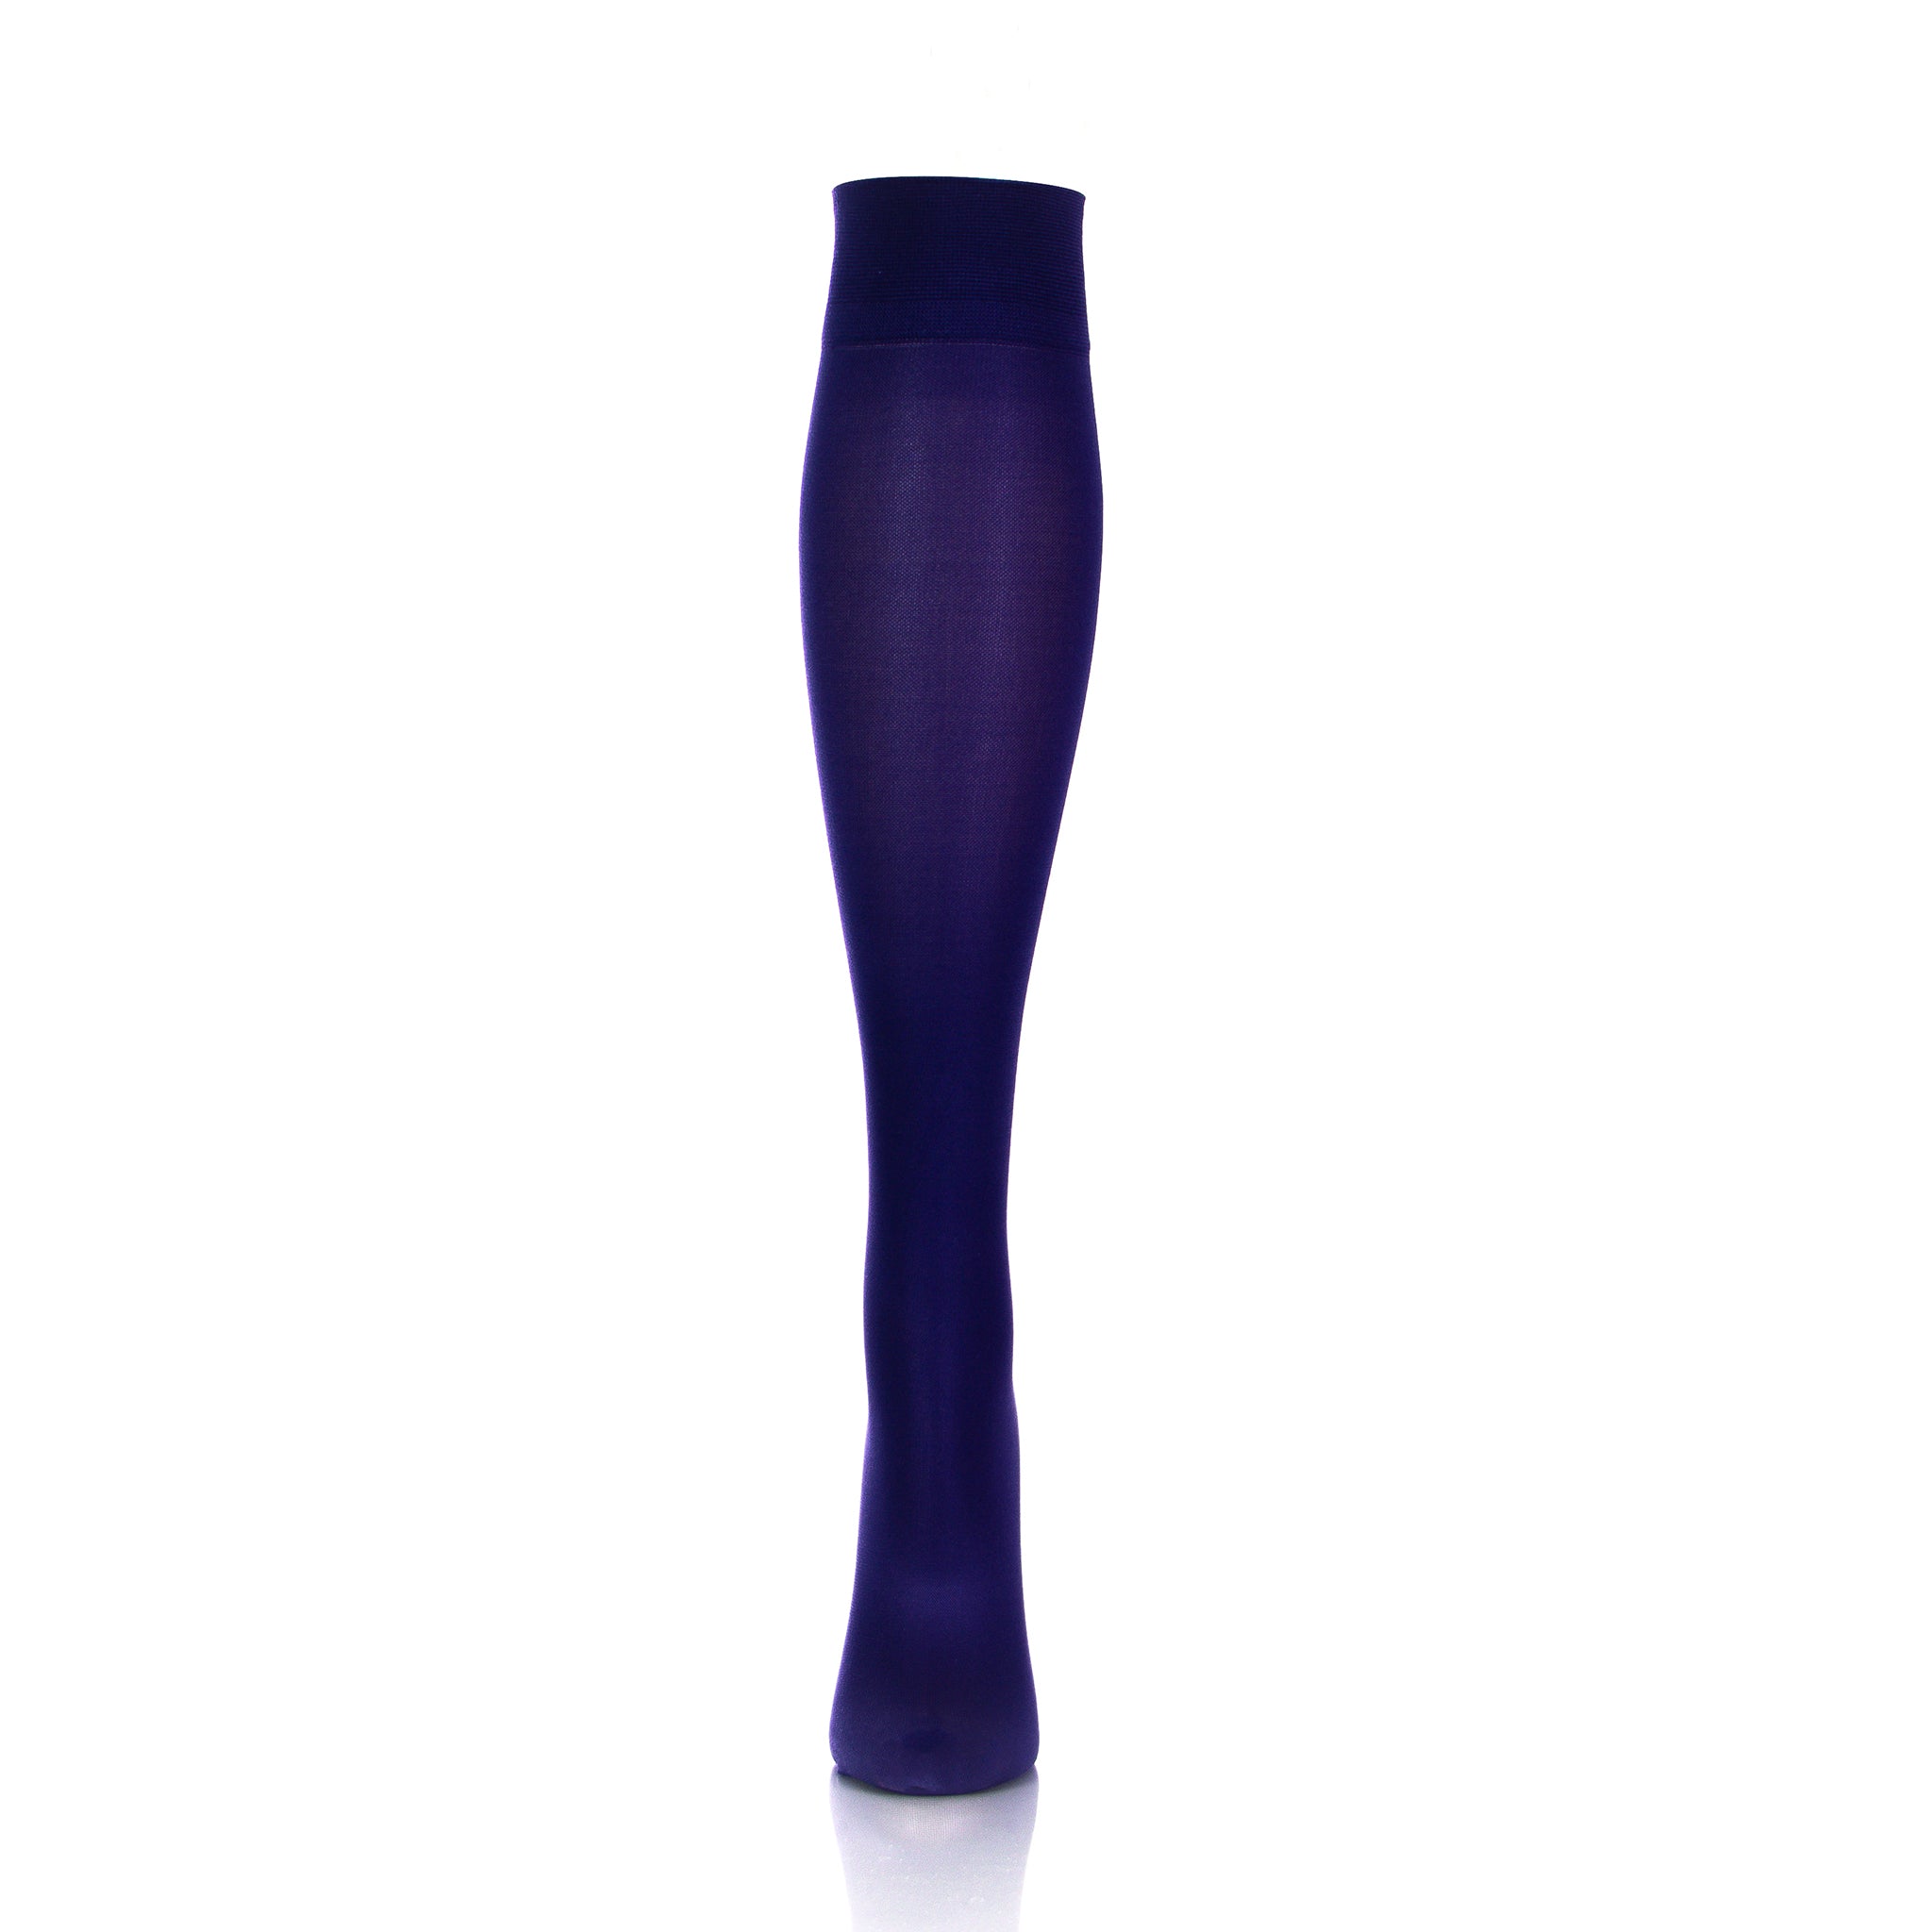 Compression Hose For Women - Colored - Purple Color - Doctor Brace Softmedi - Front View